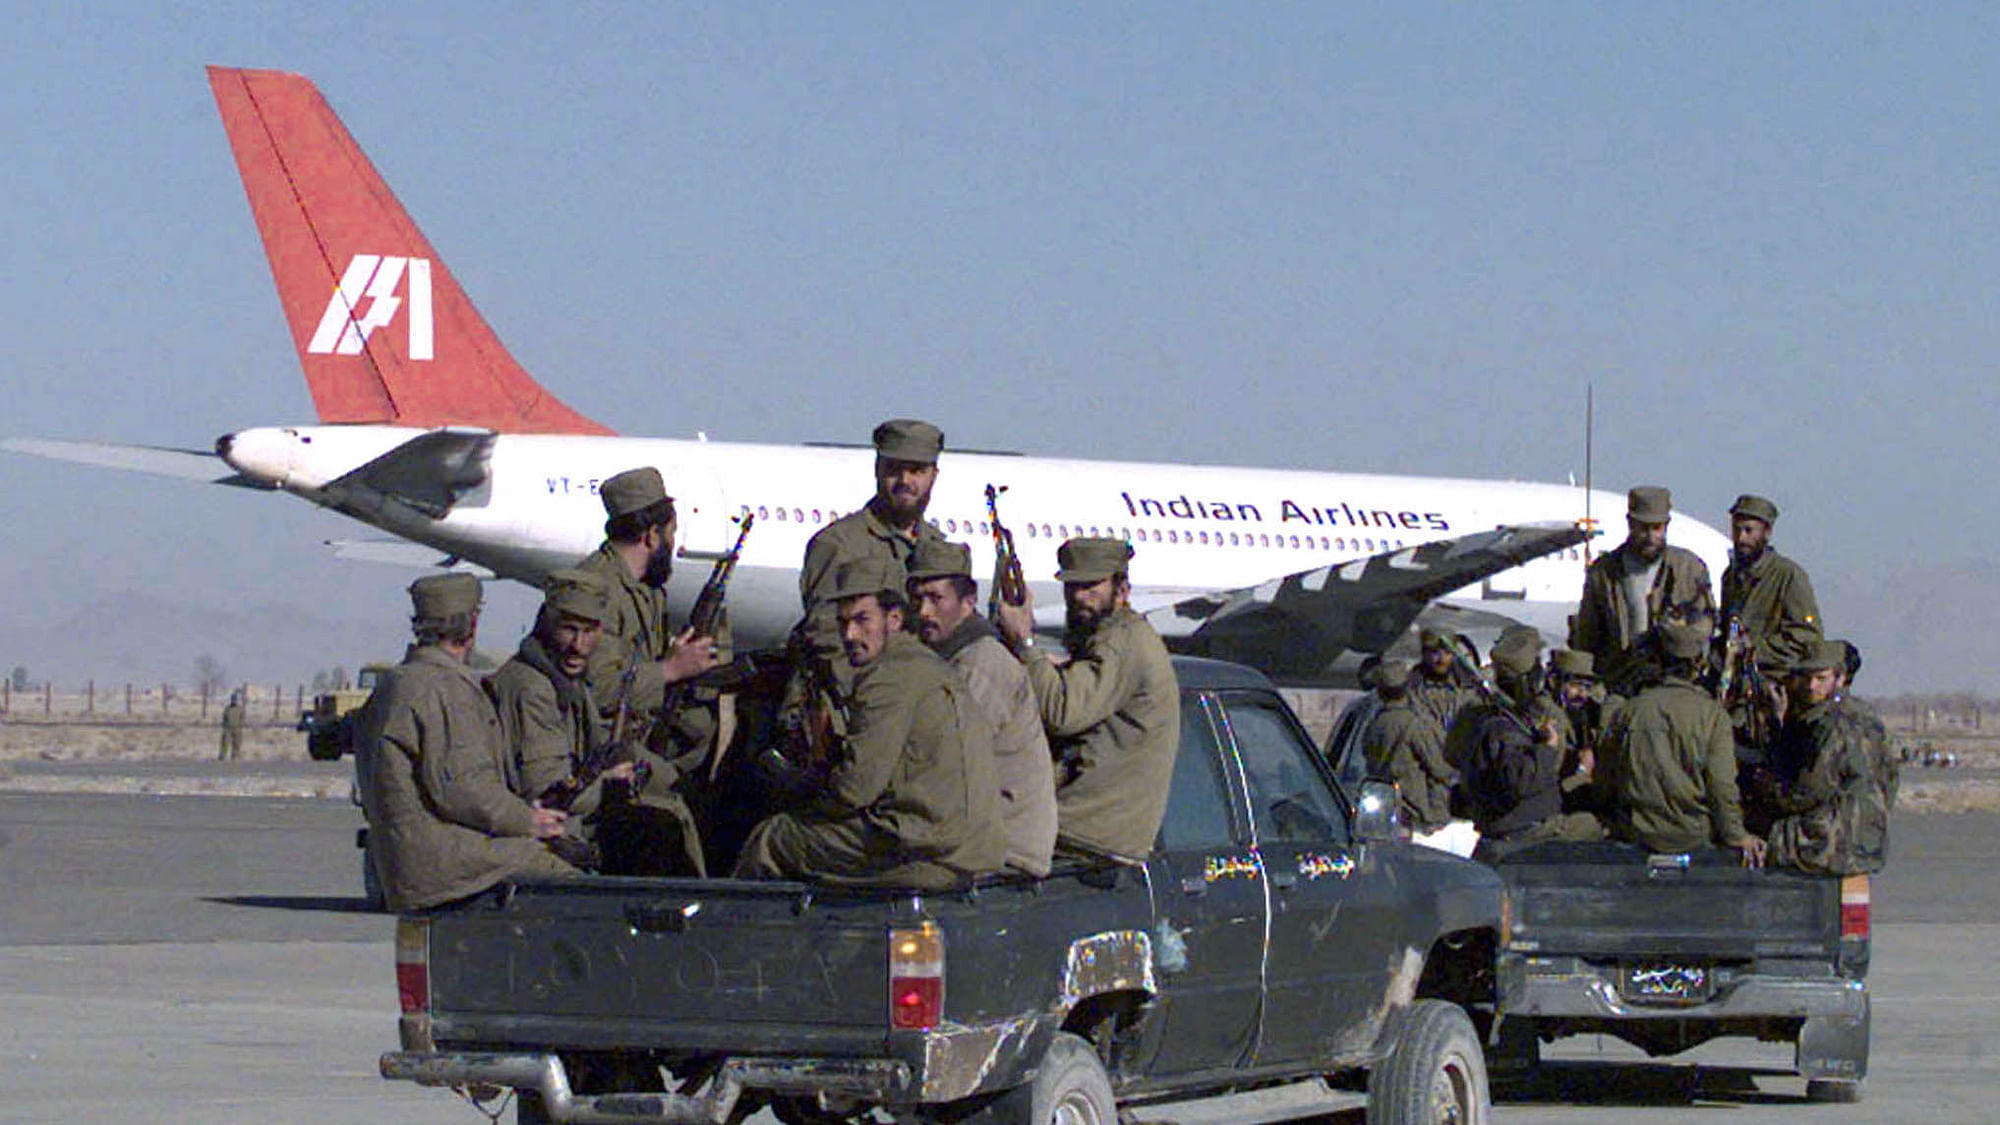 Armed soldiers from the Taliban Islamic militia race towards the hijacked Indian Airlines plane at Kandahar airport.